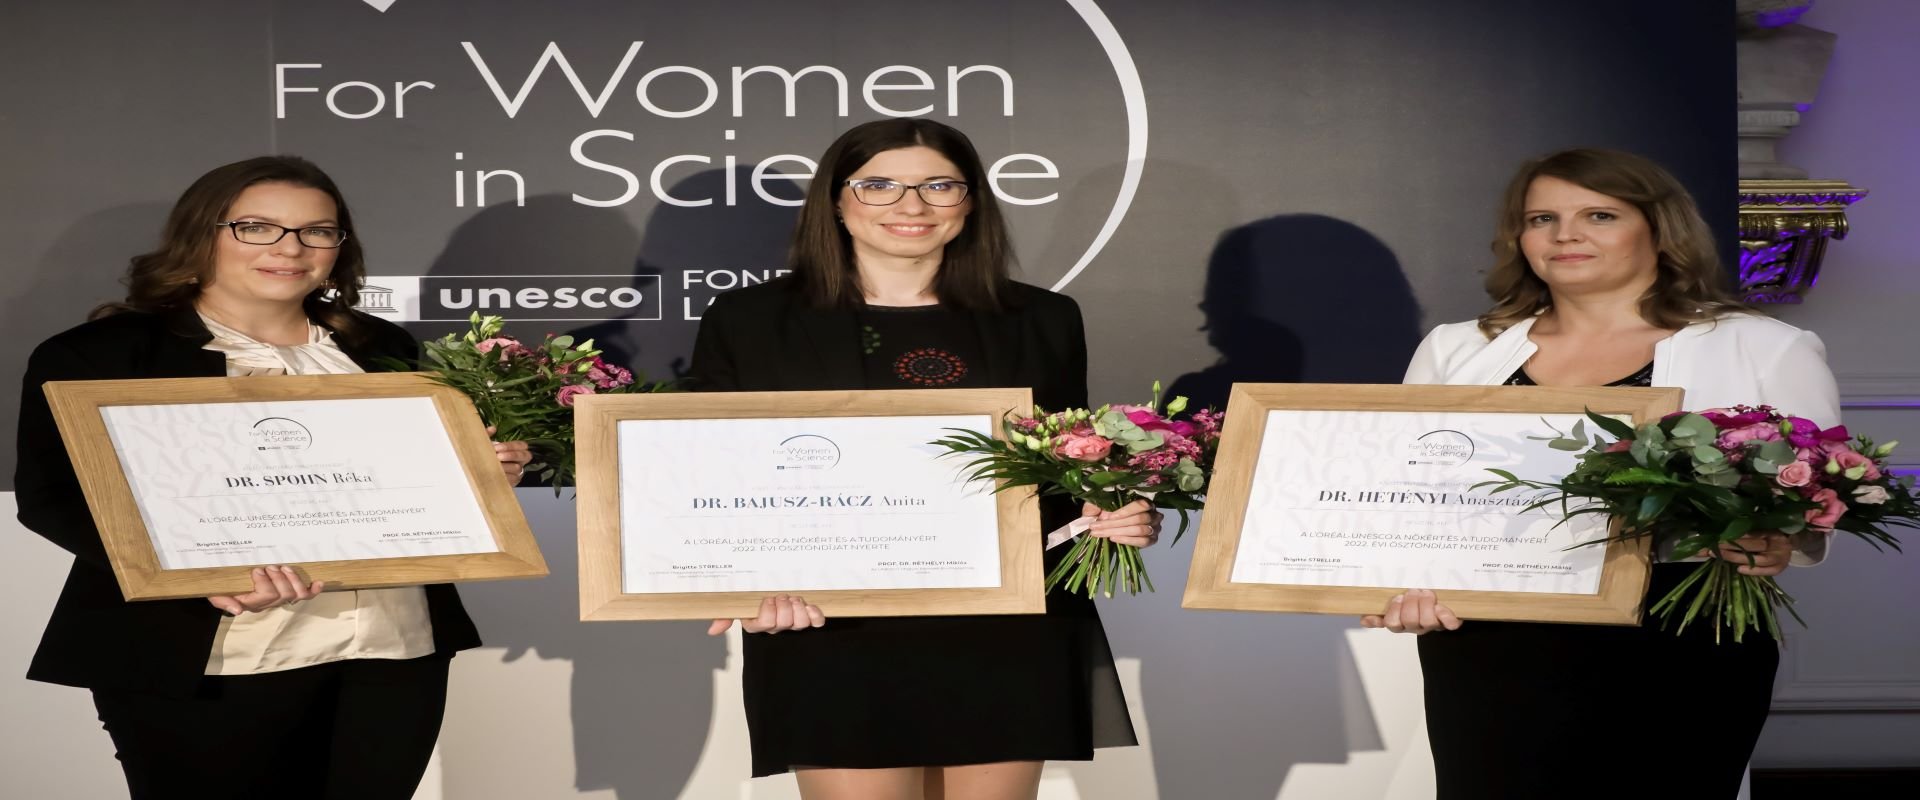 Loreal UNESCO For Women in Science